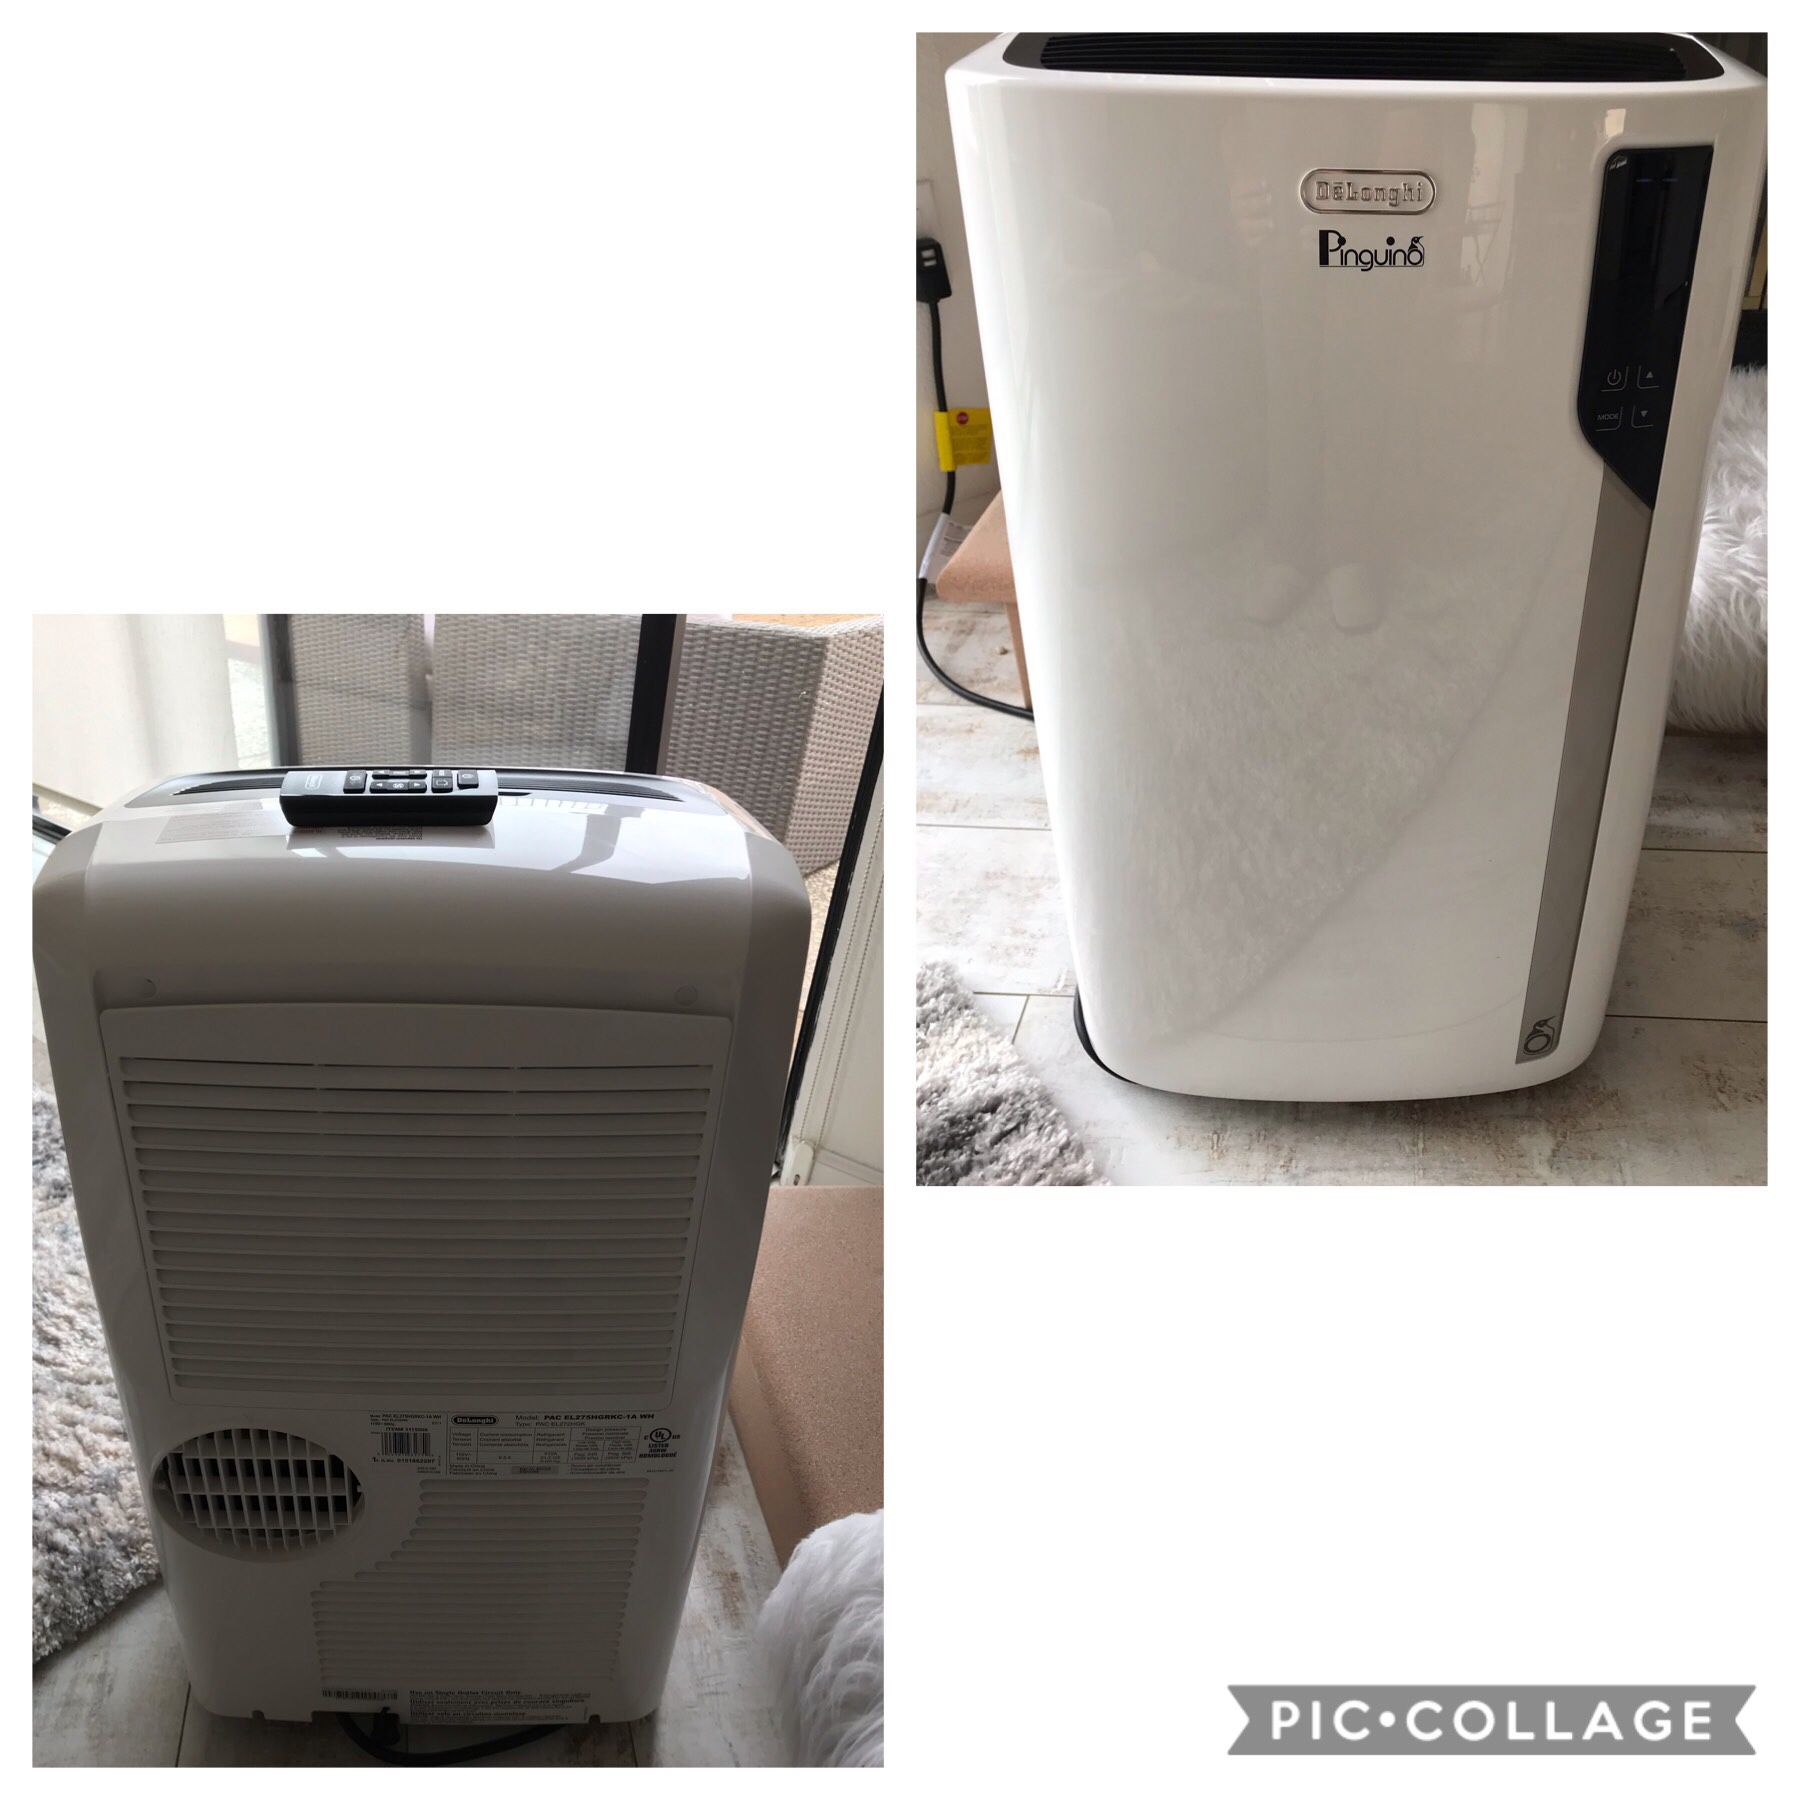 Costco brand new AC unit , works incredible!!